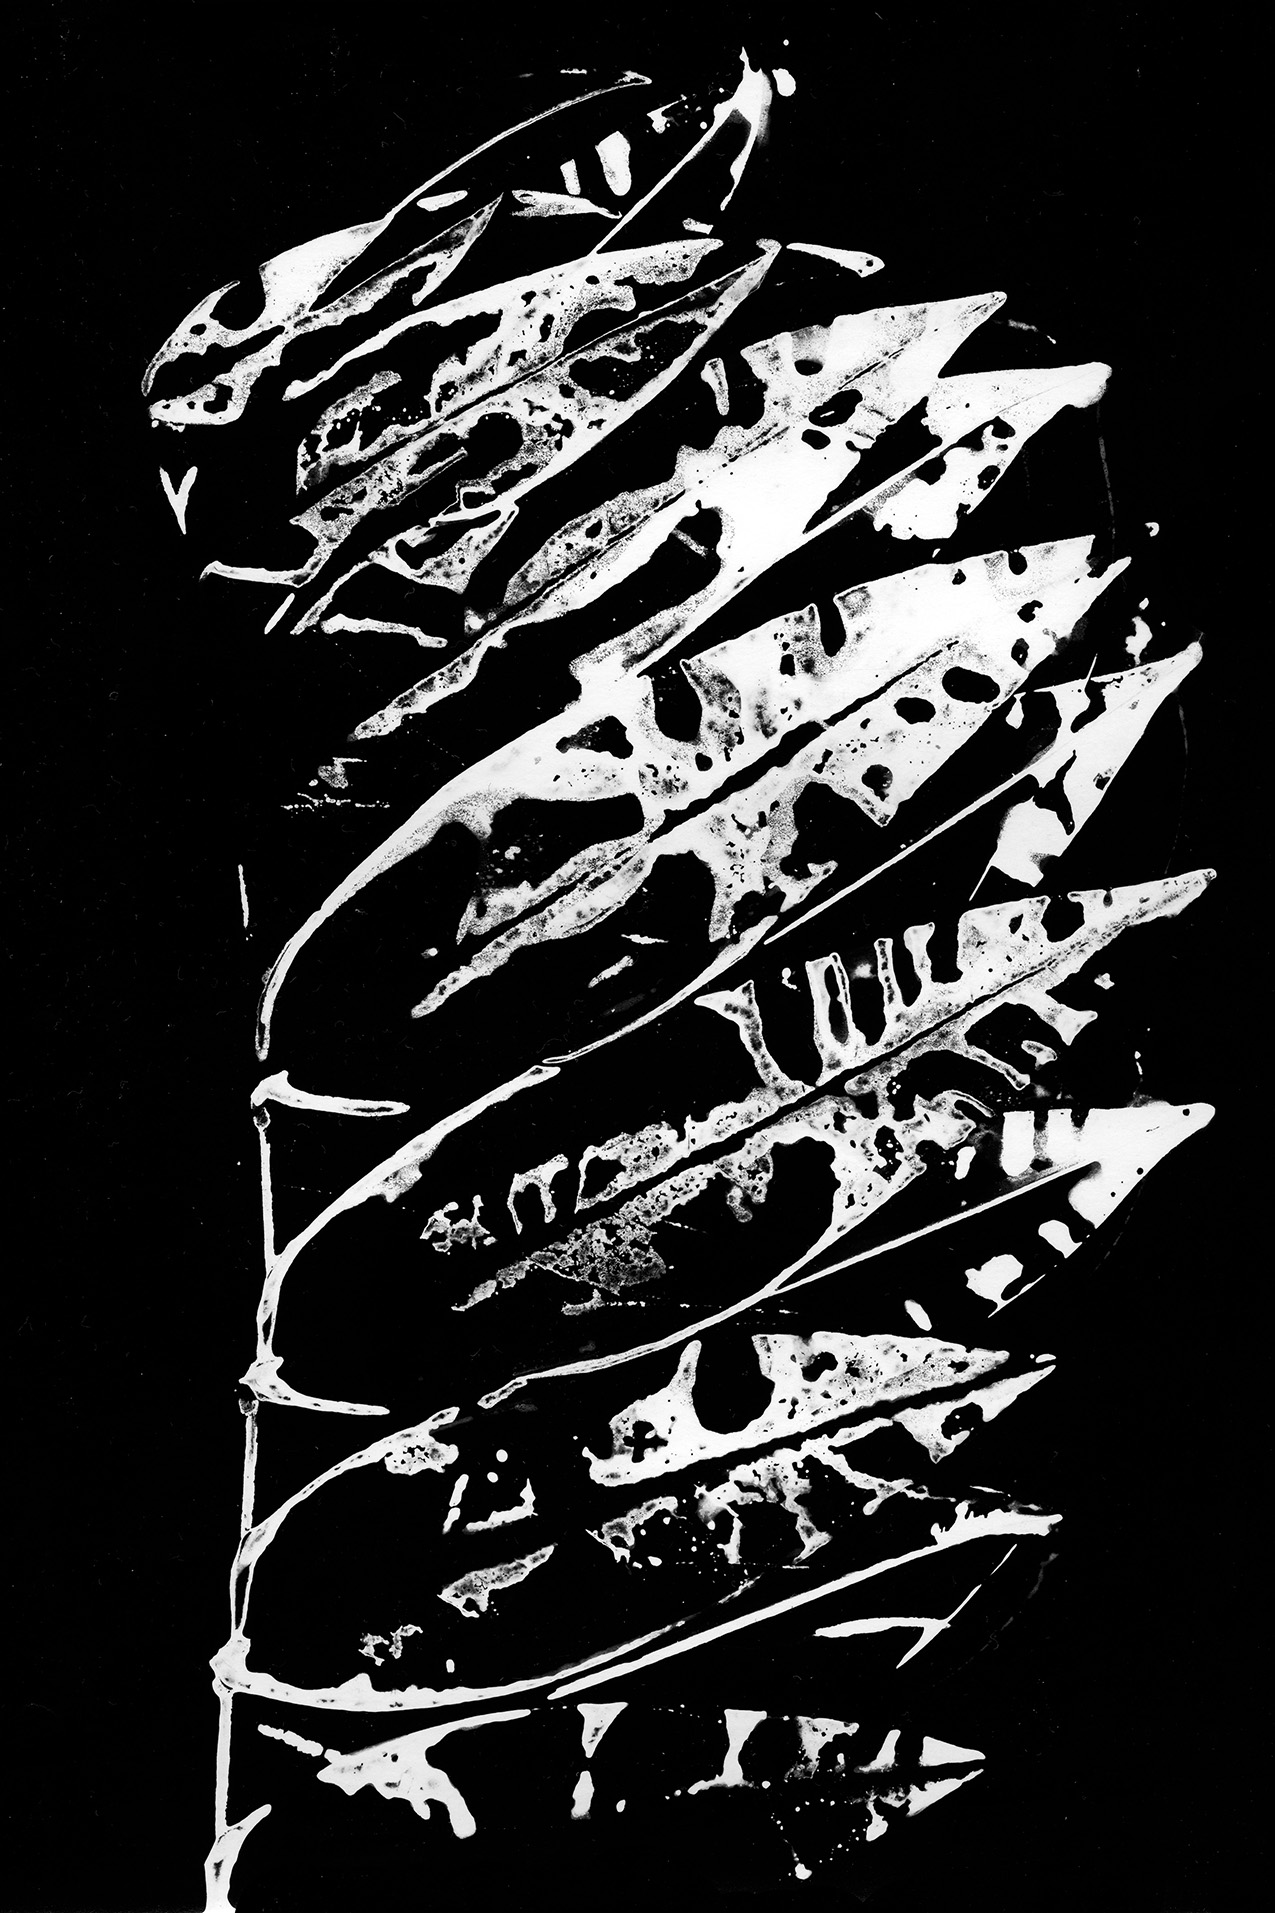 black and white photogram of a stem with lanceolate leaves extending to the right